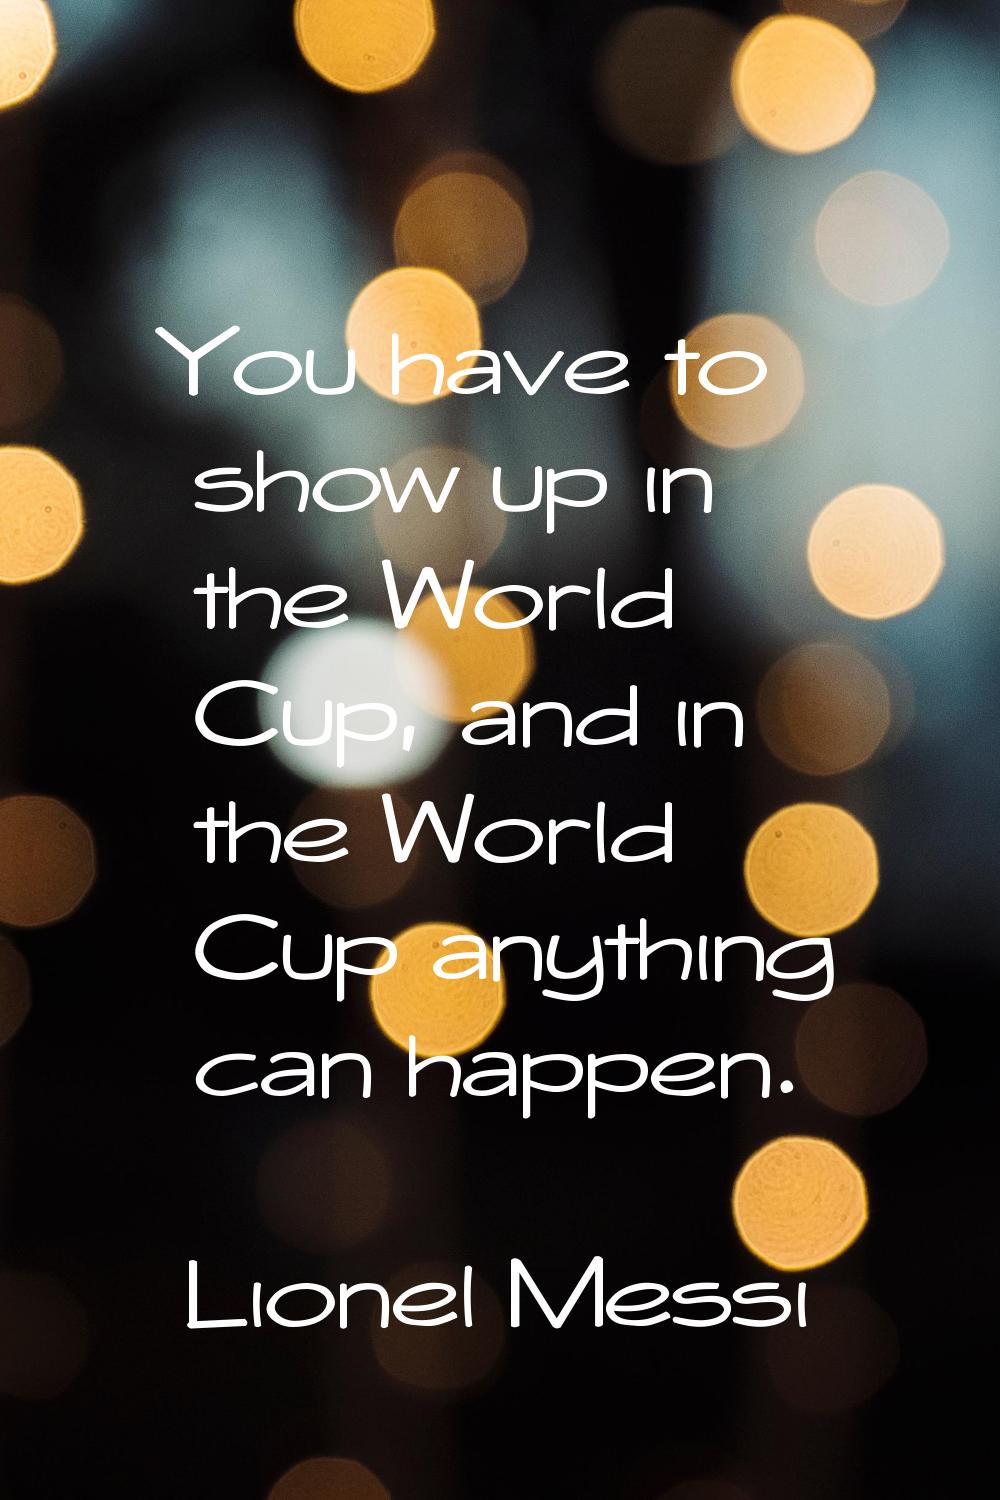 You have to show up in the World Cup, and in the World Cup anything can happen.